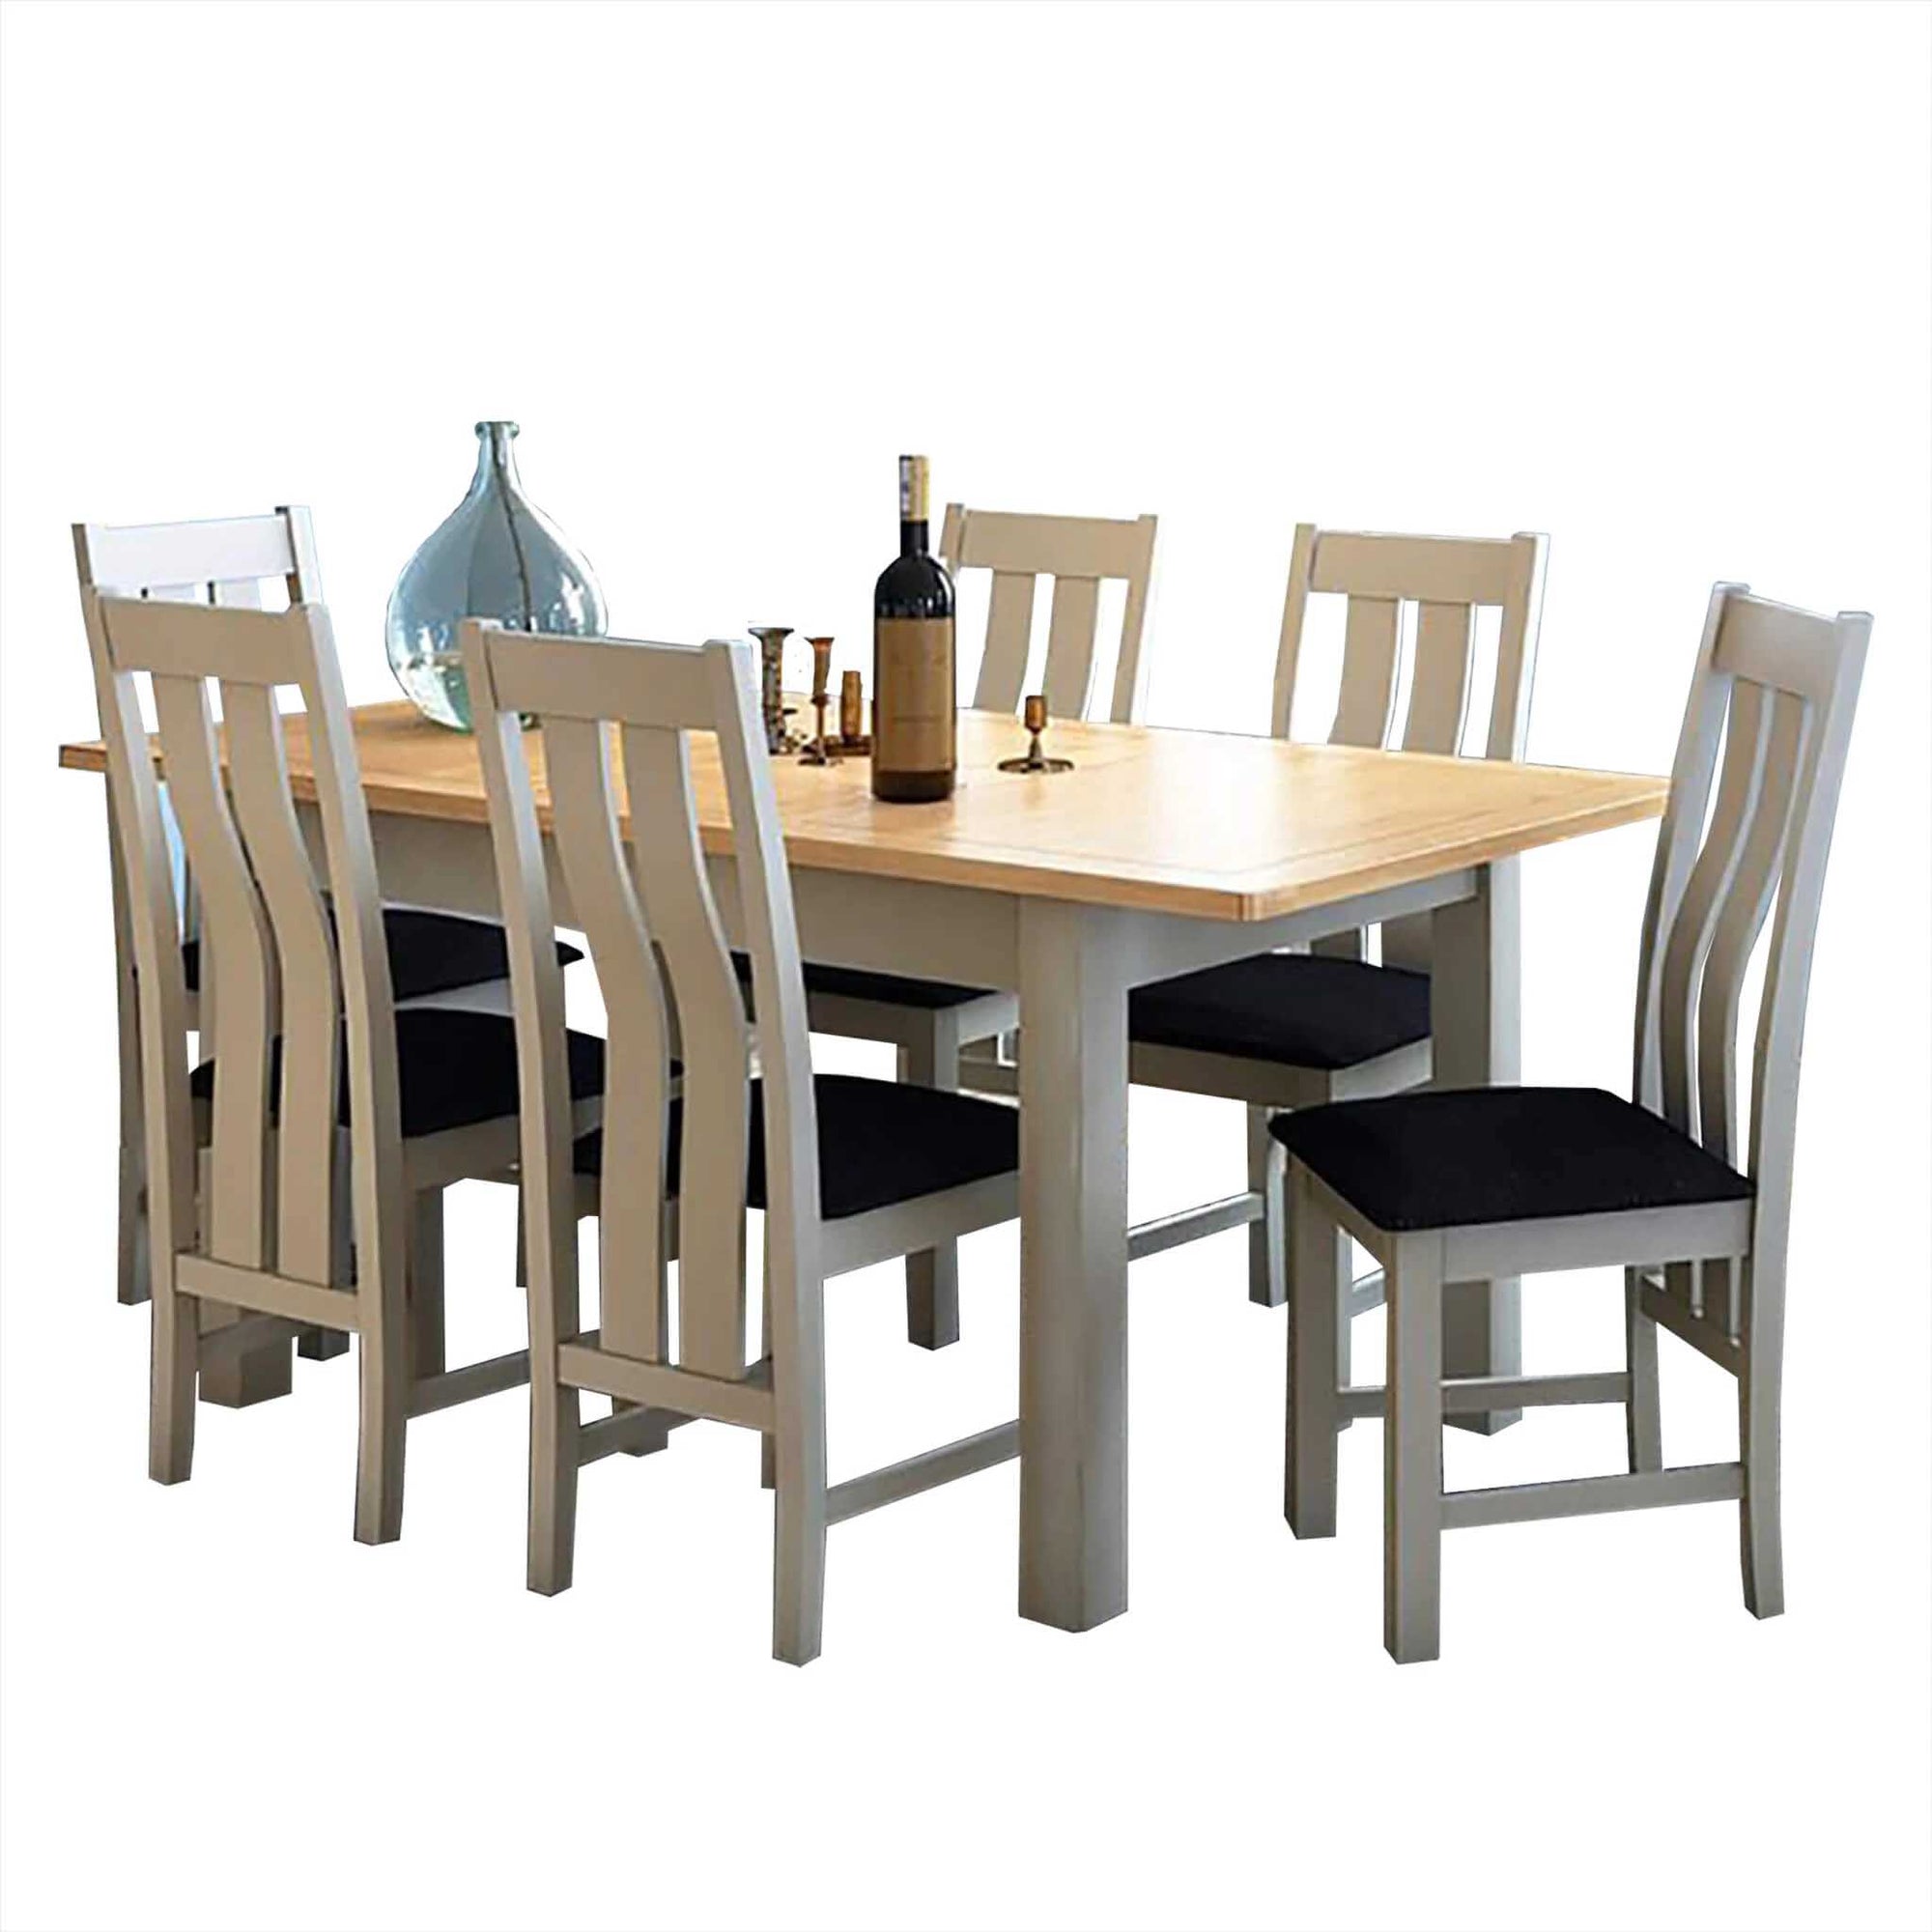 Solid Wood Oak Dining Sets 2 14 Seater Dining Table Chair Sets Roseland Furniture